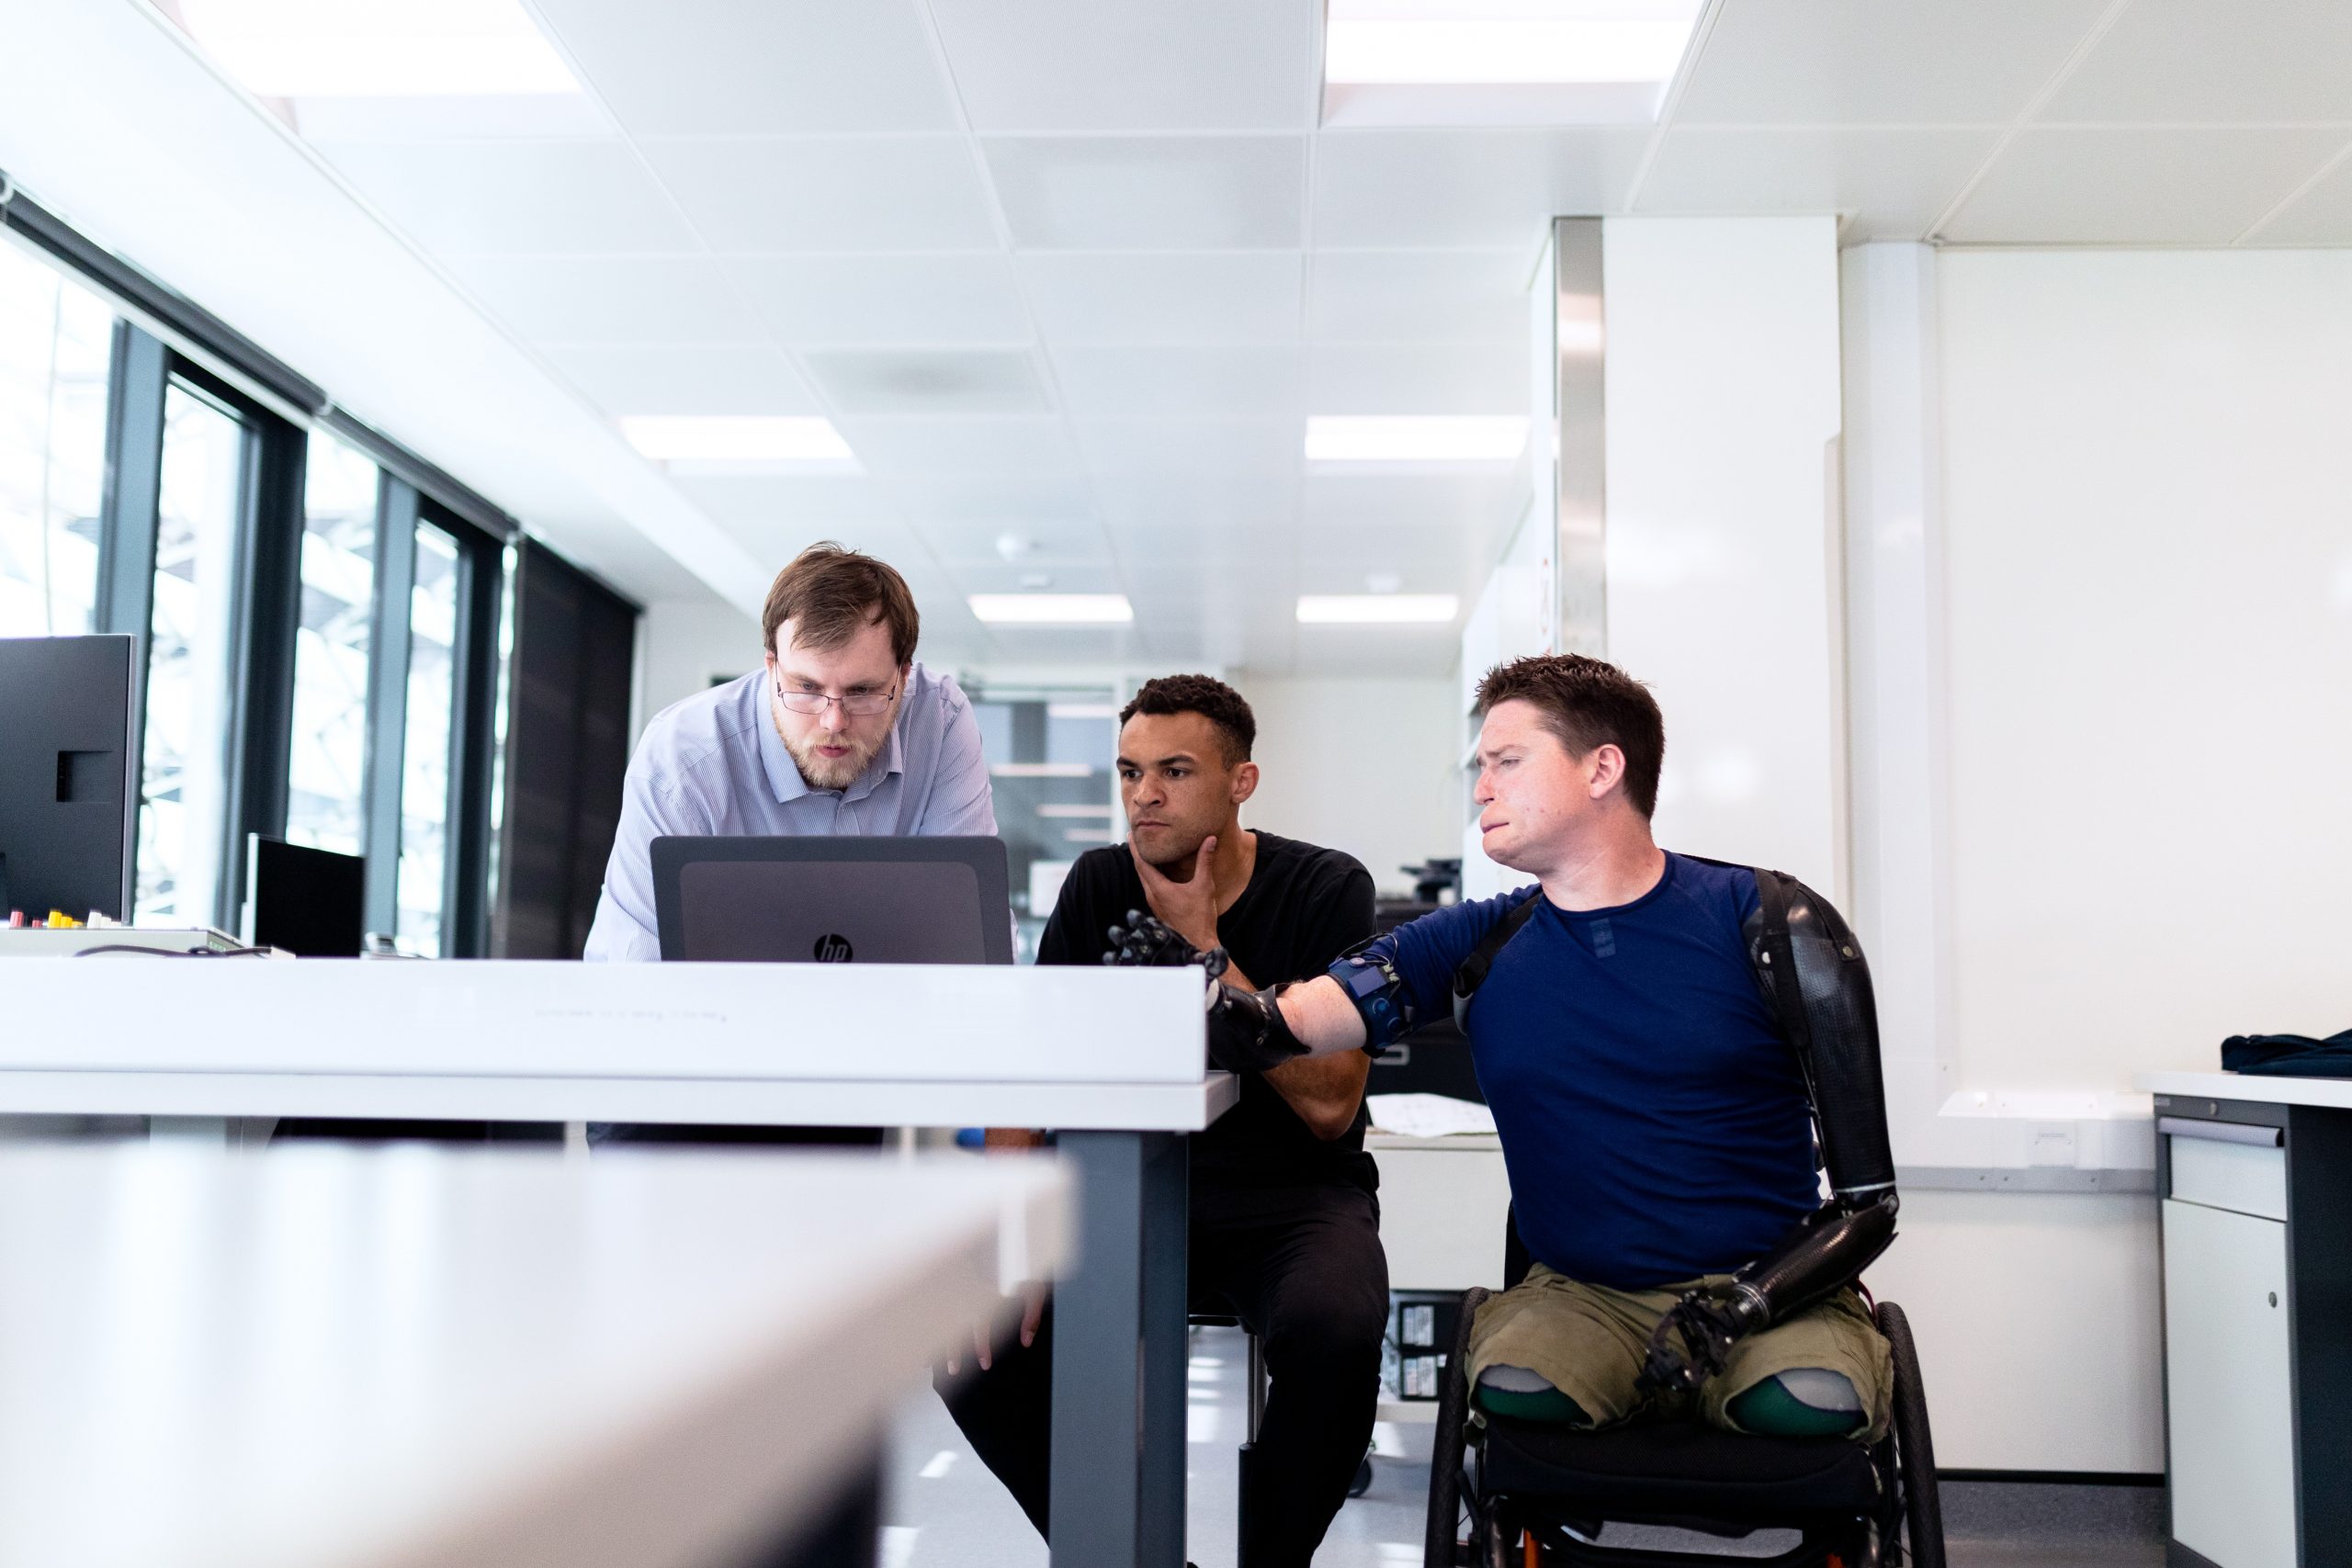 Three young men all gather around a desktop computer to work. The one on the far right is a multiple amputee and a wheelchair user.